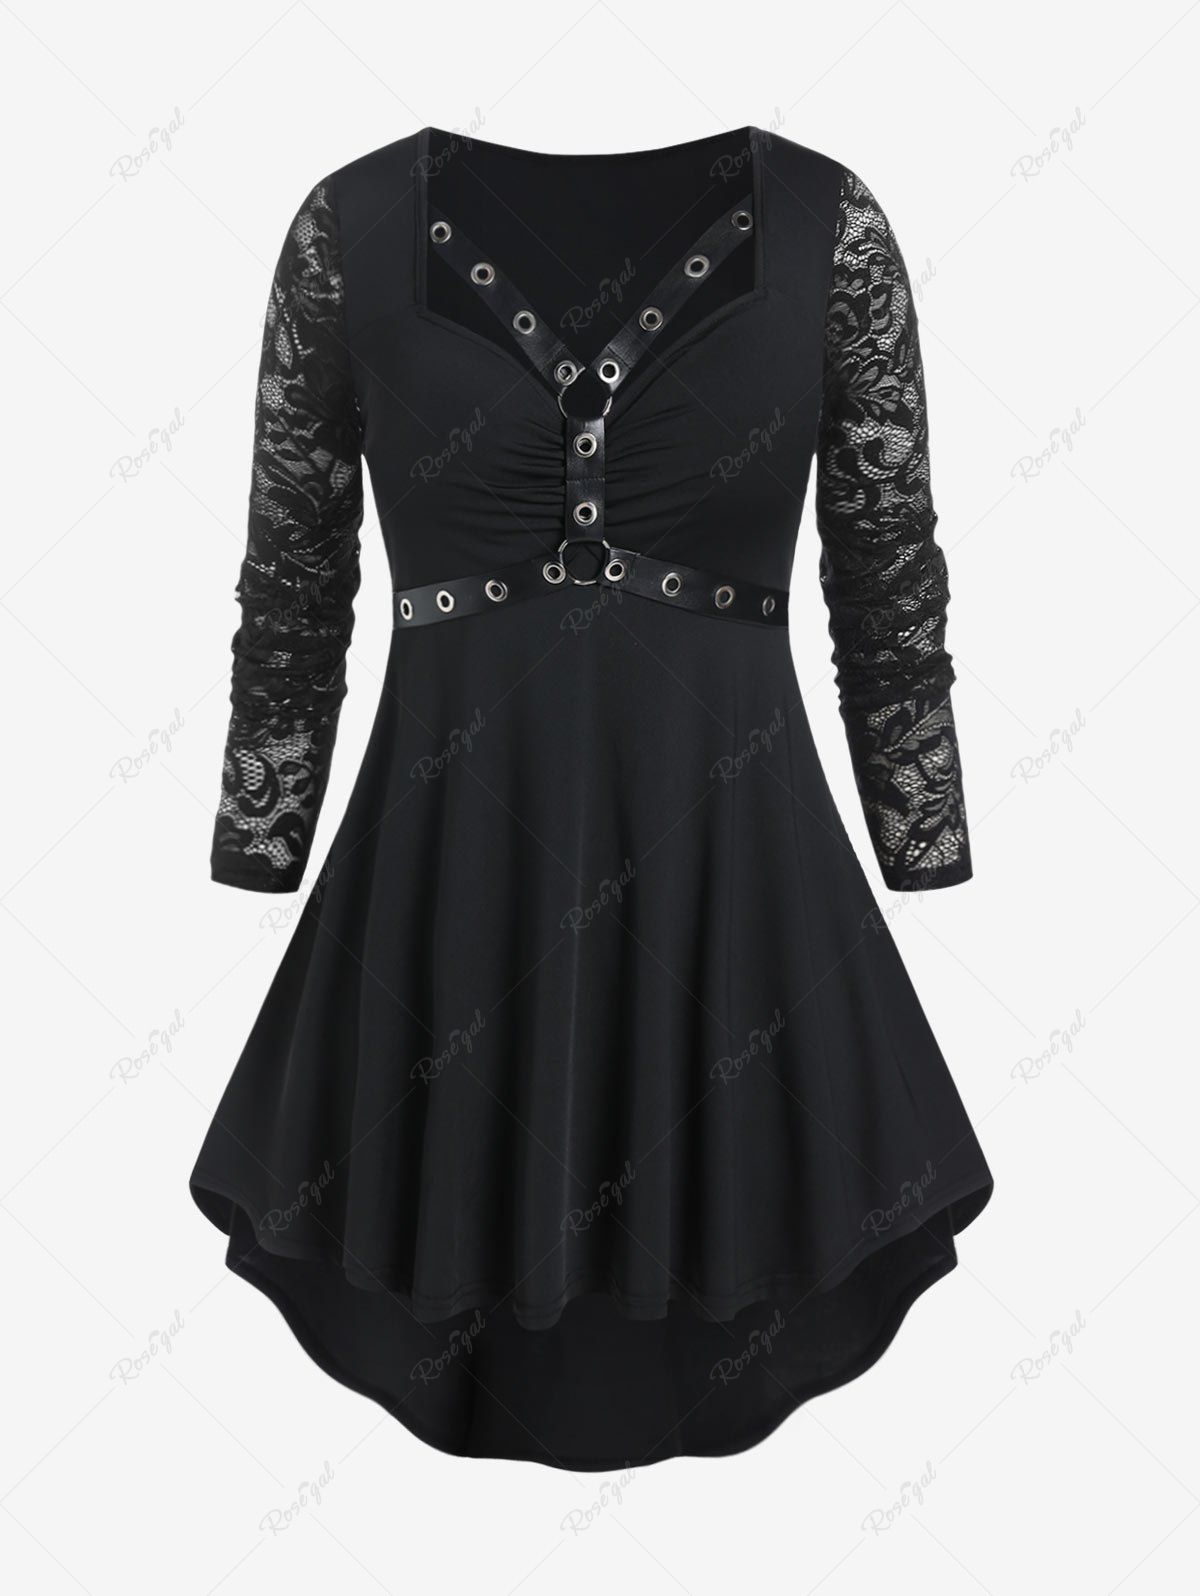 Fancy Gothic Lace Sleeve Harness Grommets High Low Tee  